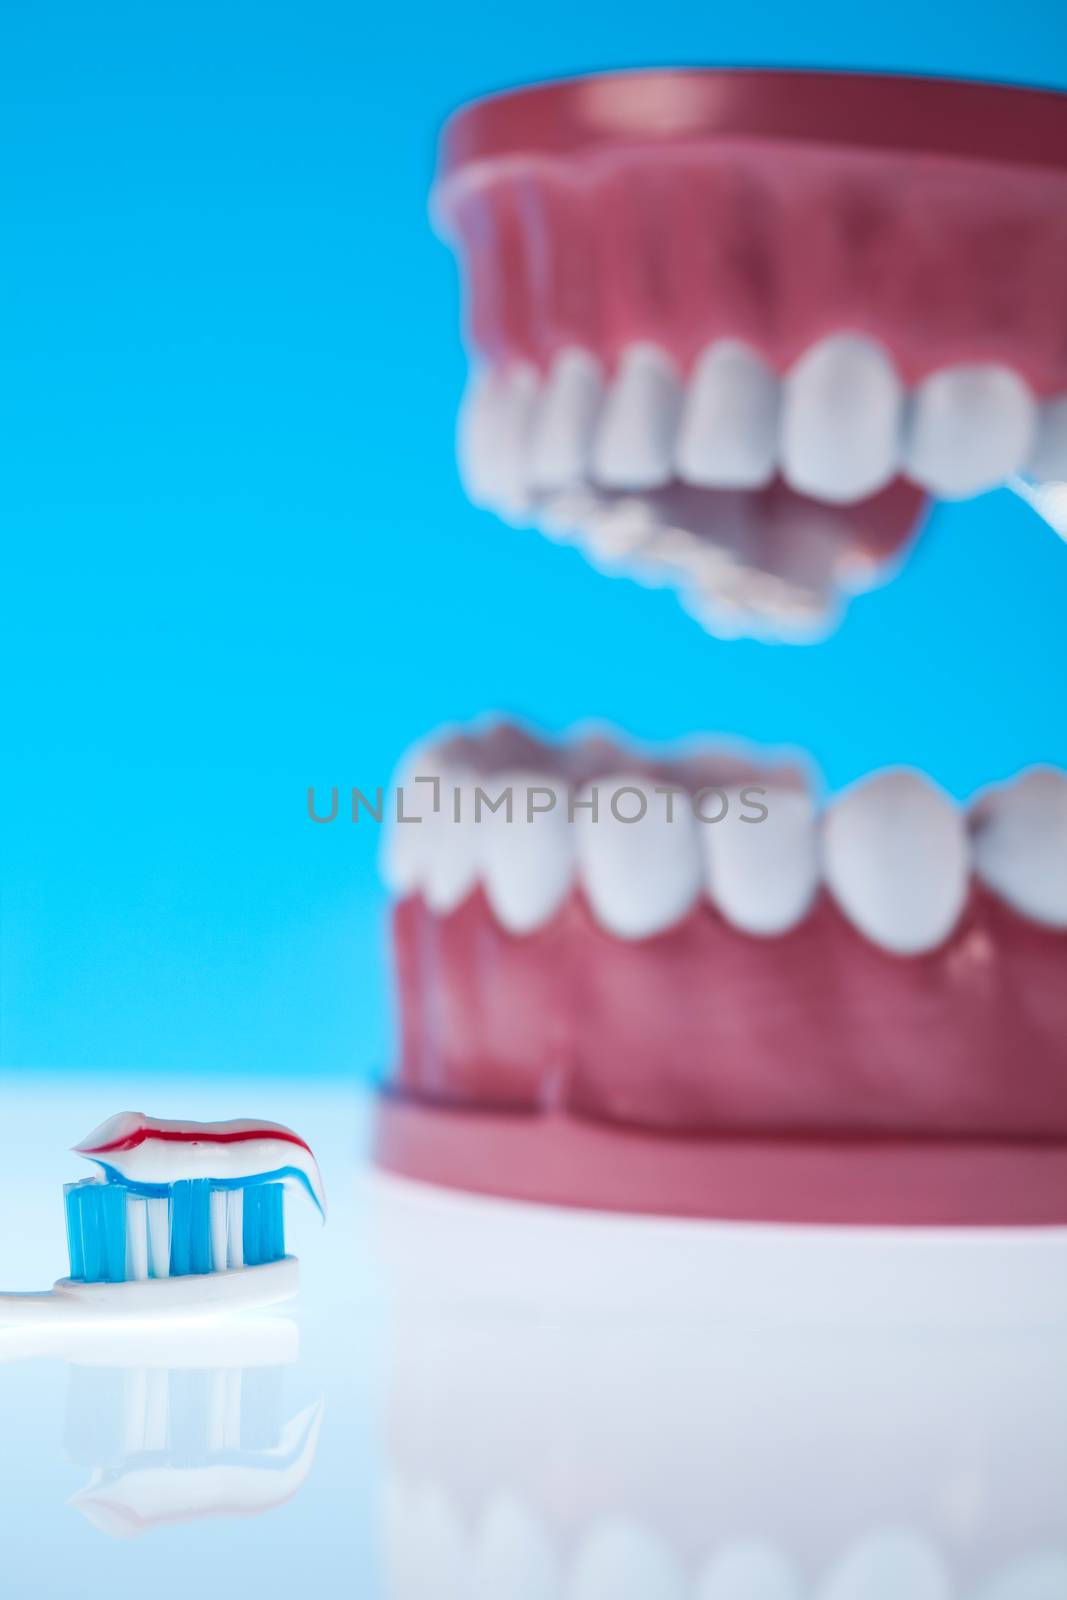 Anatomy of the tooth, bright colorful tone concept